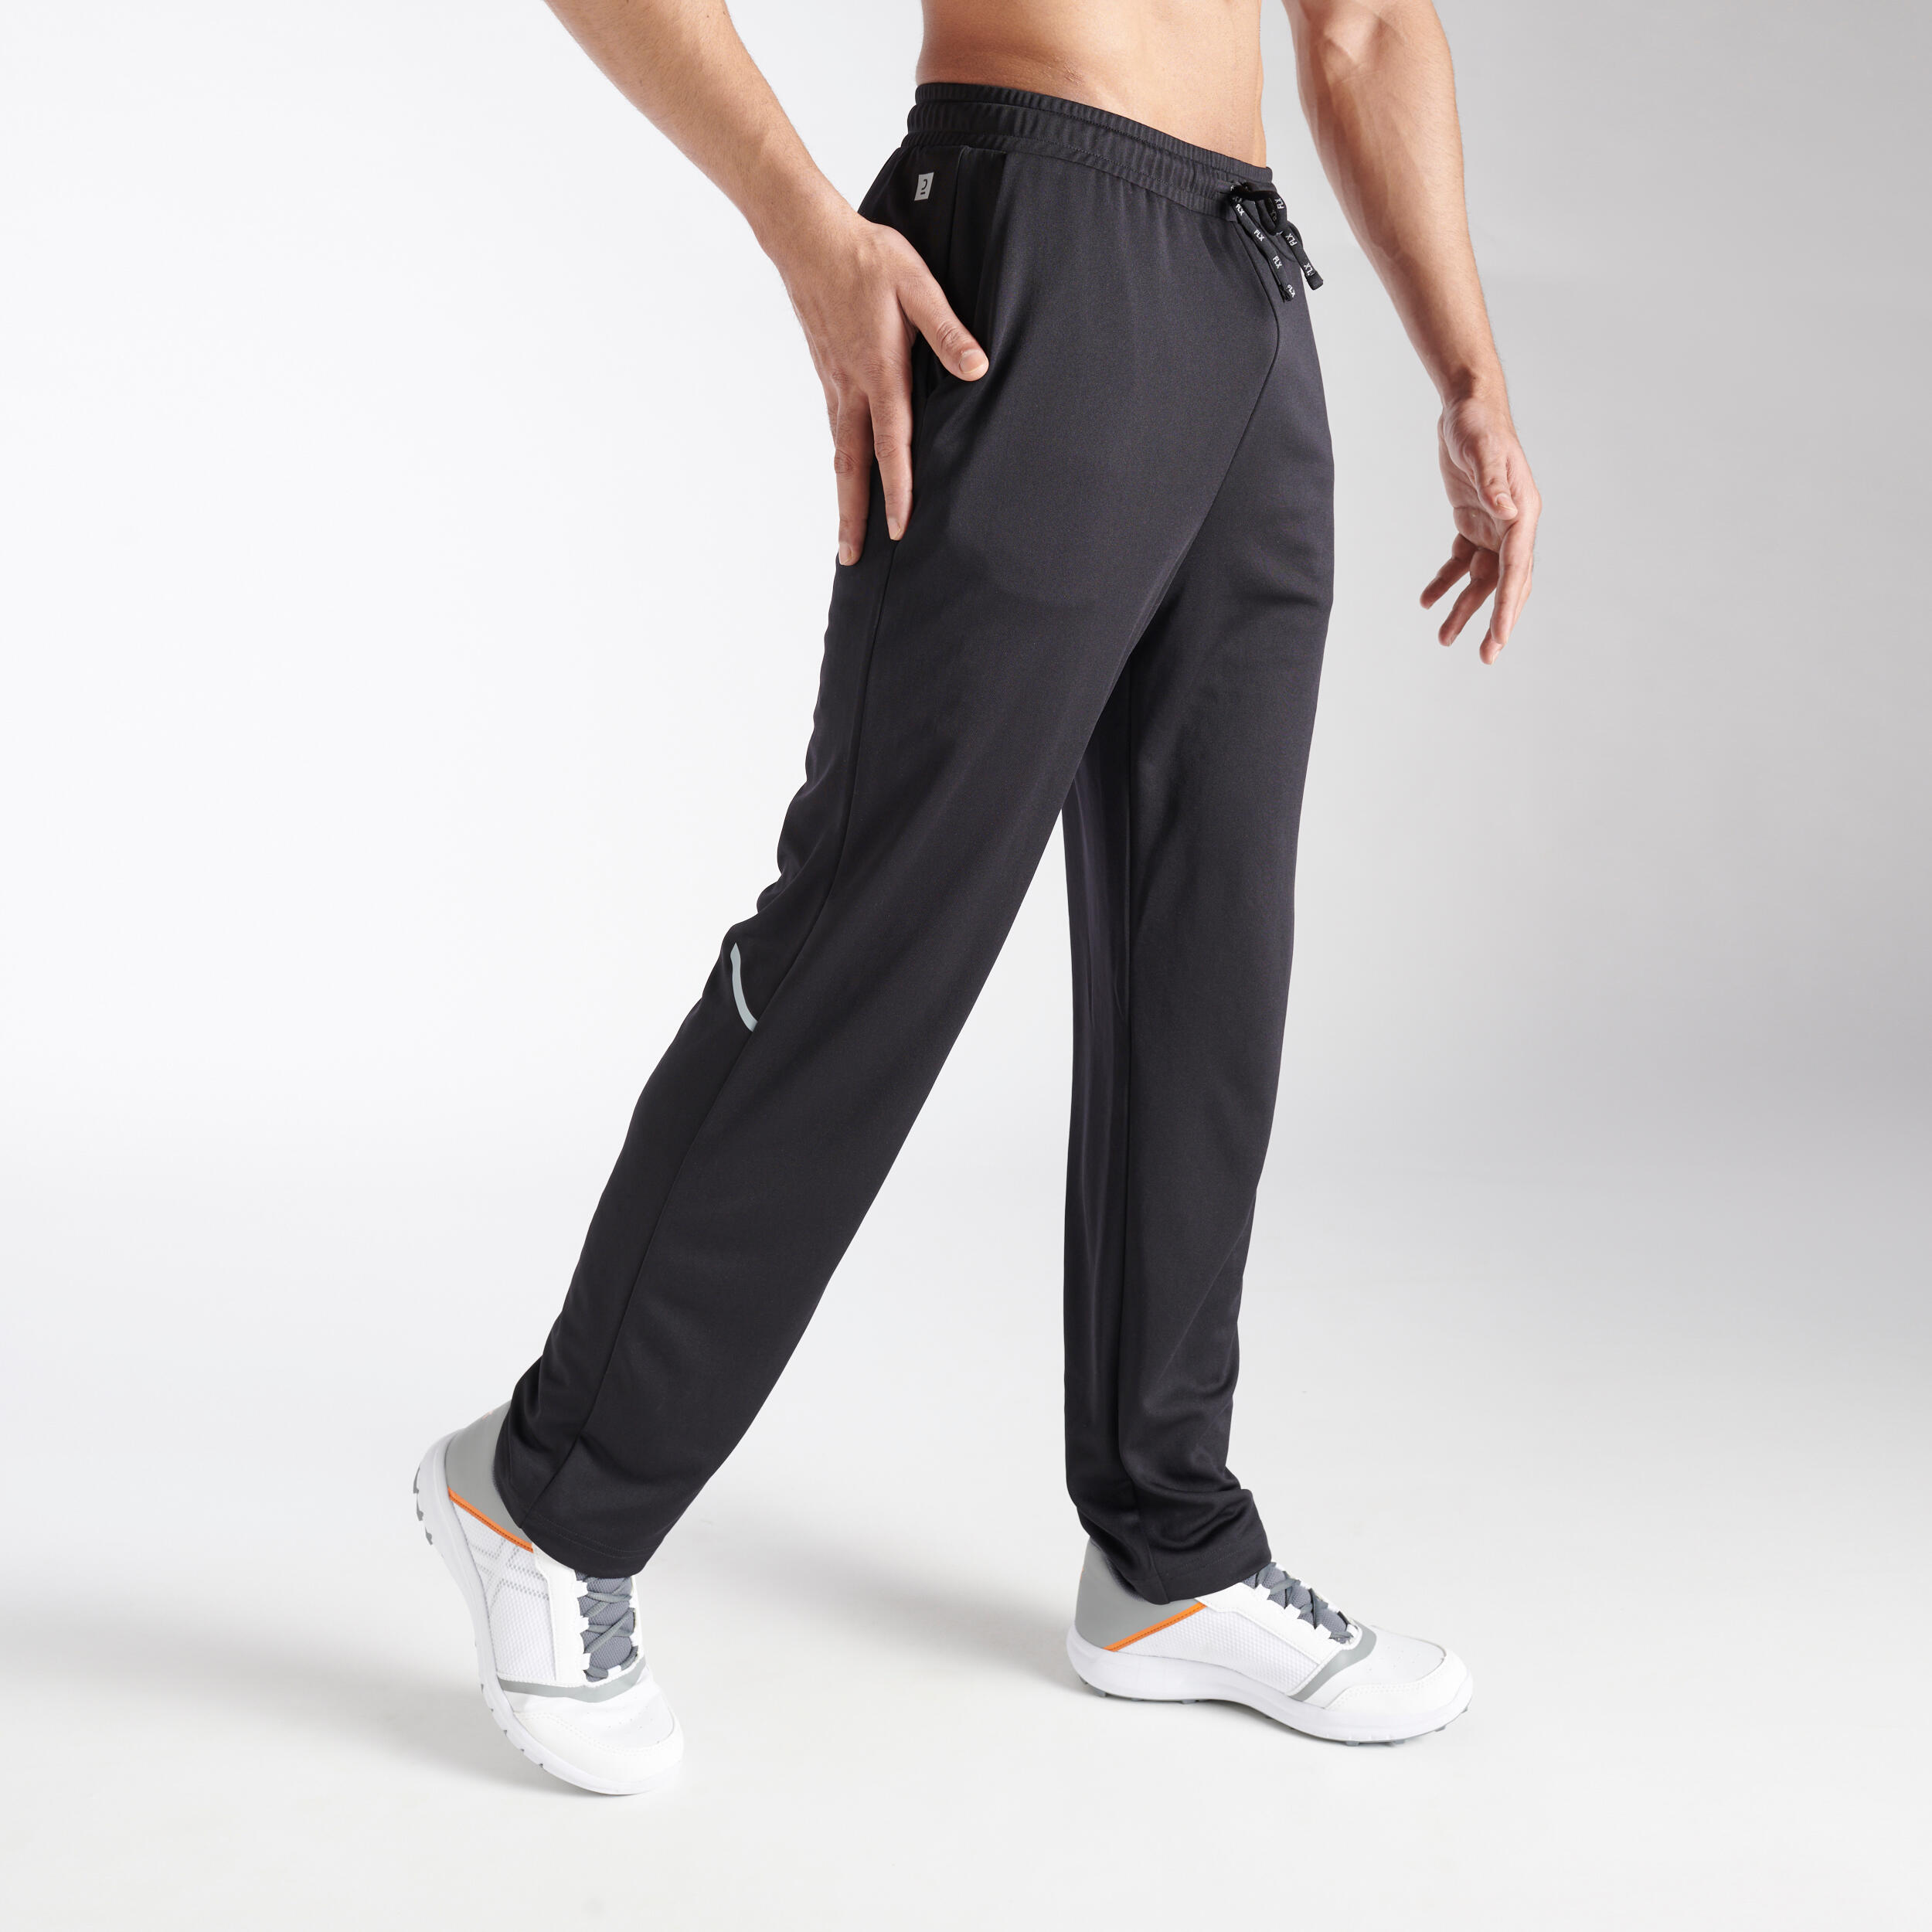 Decathlon Sports India - Track Pants, Straight fit, TSR 500, Adults,  Cricket & All Sports, Black Our team of Engineers and Designers have  developed this technical colored cricket trouser for regular training